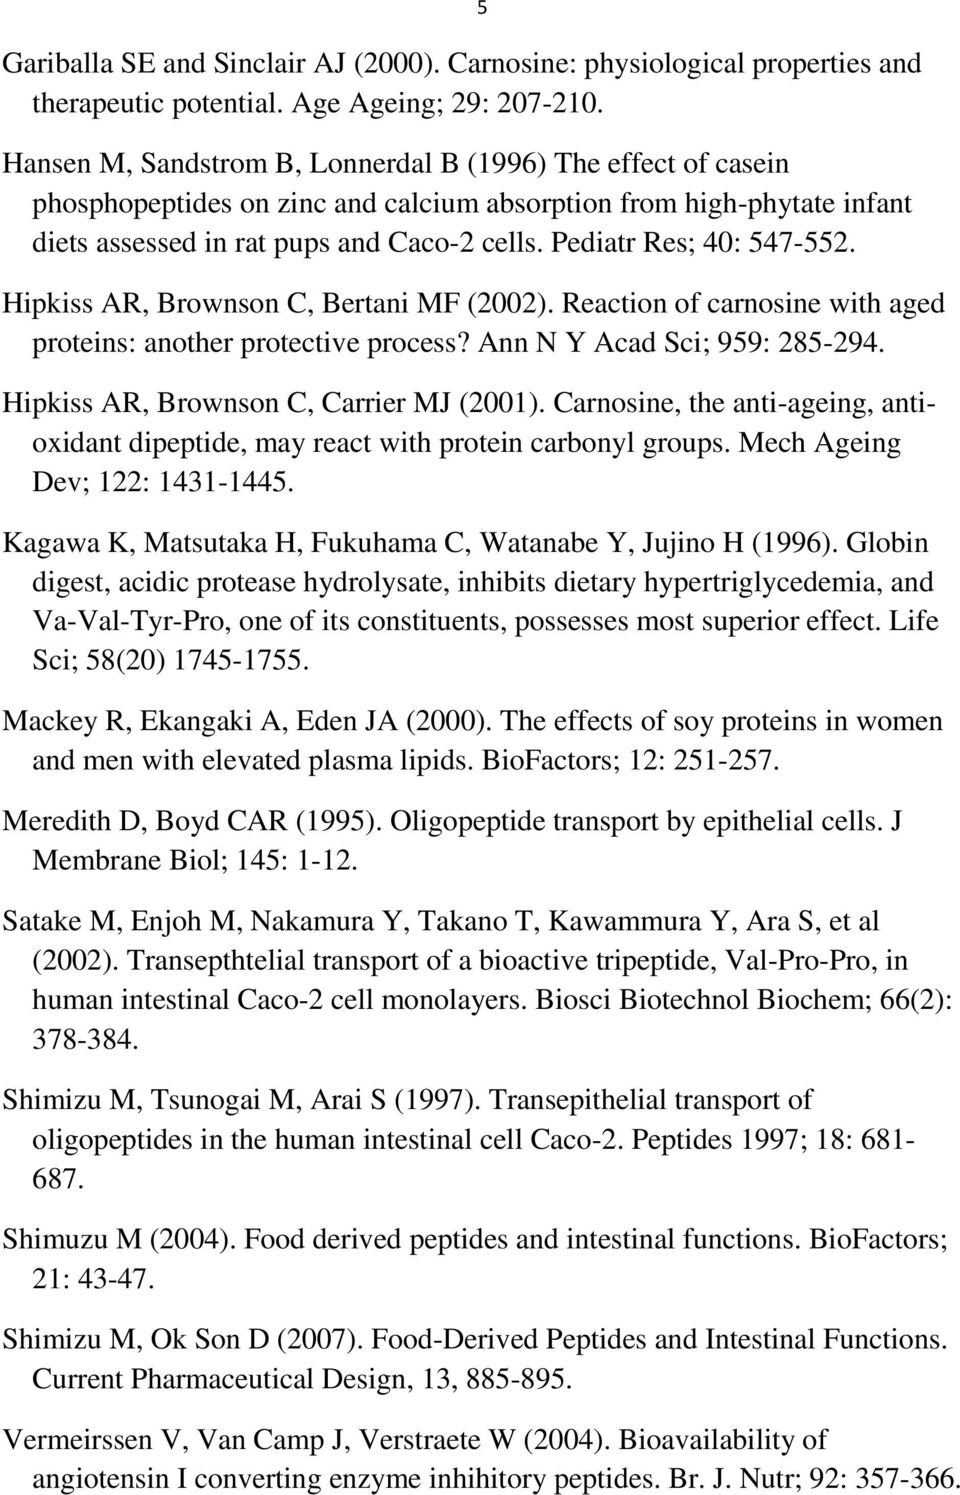 Pediatr Res; 40: 547-552. 5 Hipkiss AR, Brownson C, Bertani MF (2002). Reaction of carnosine with aged proteins: another protective process? Ann N Y Acad Sci; 959: 285-294.